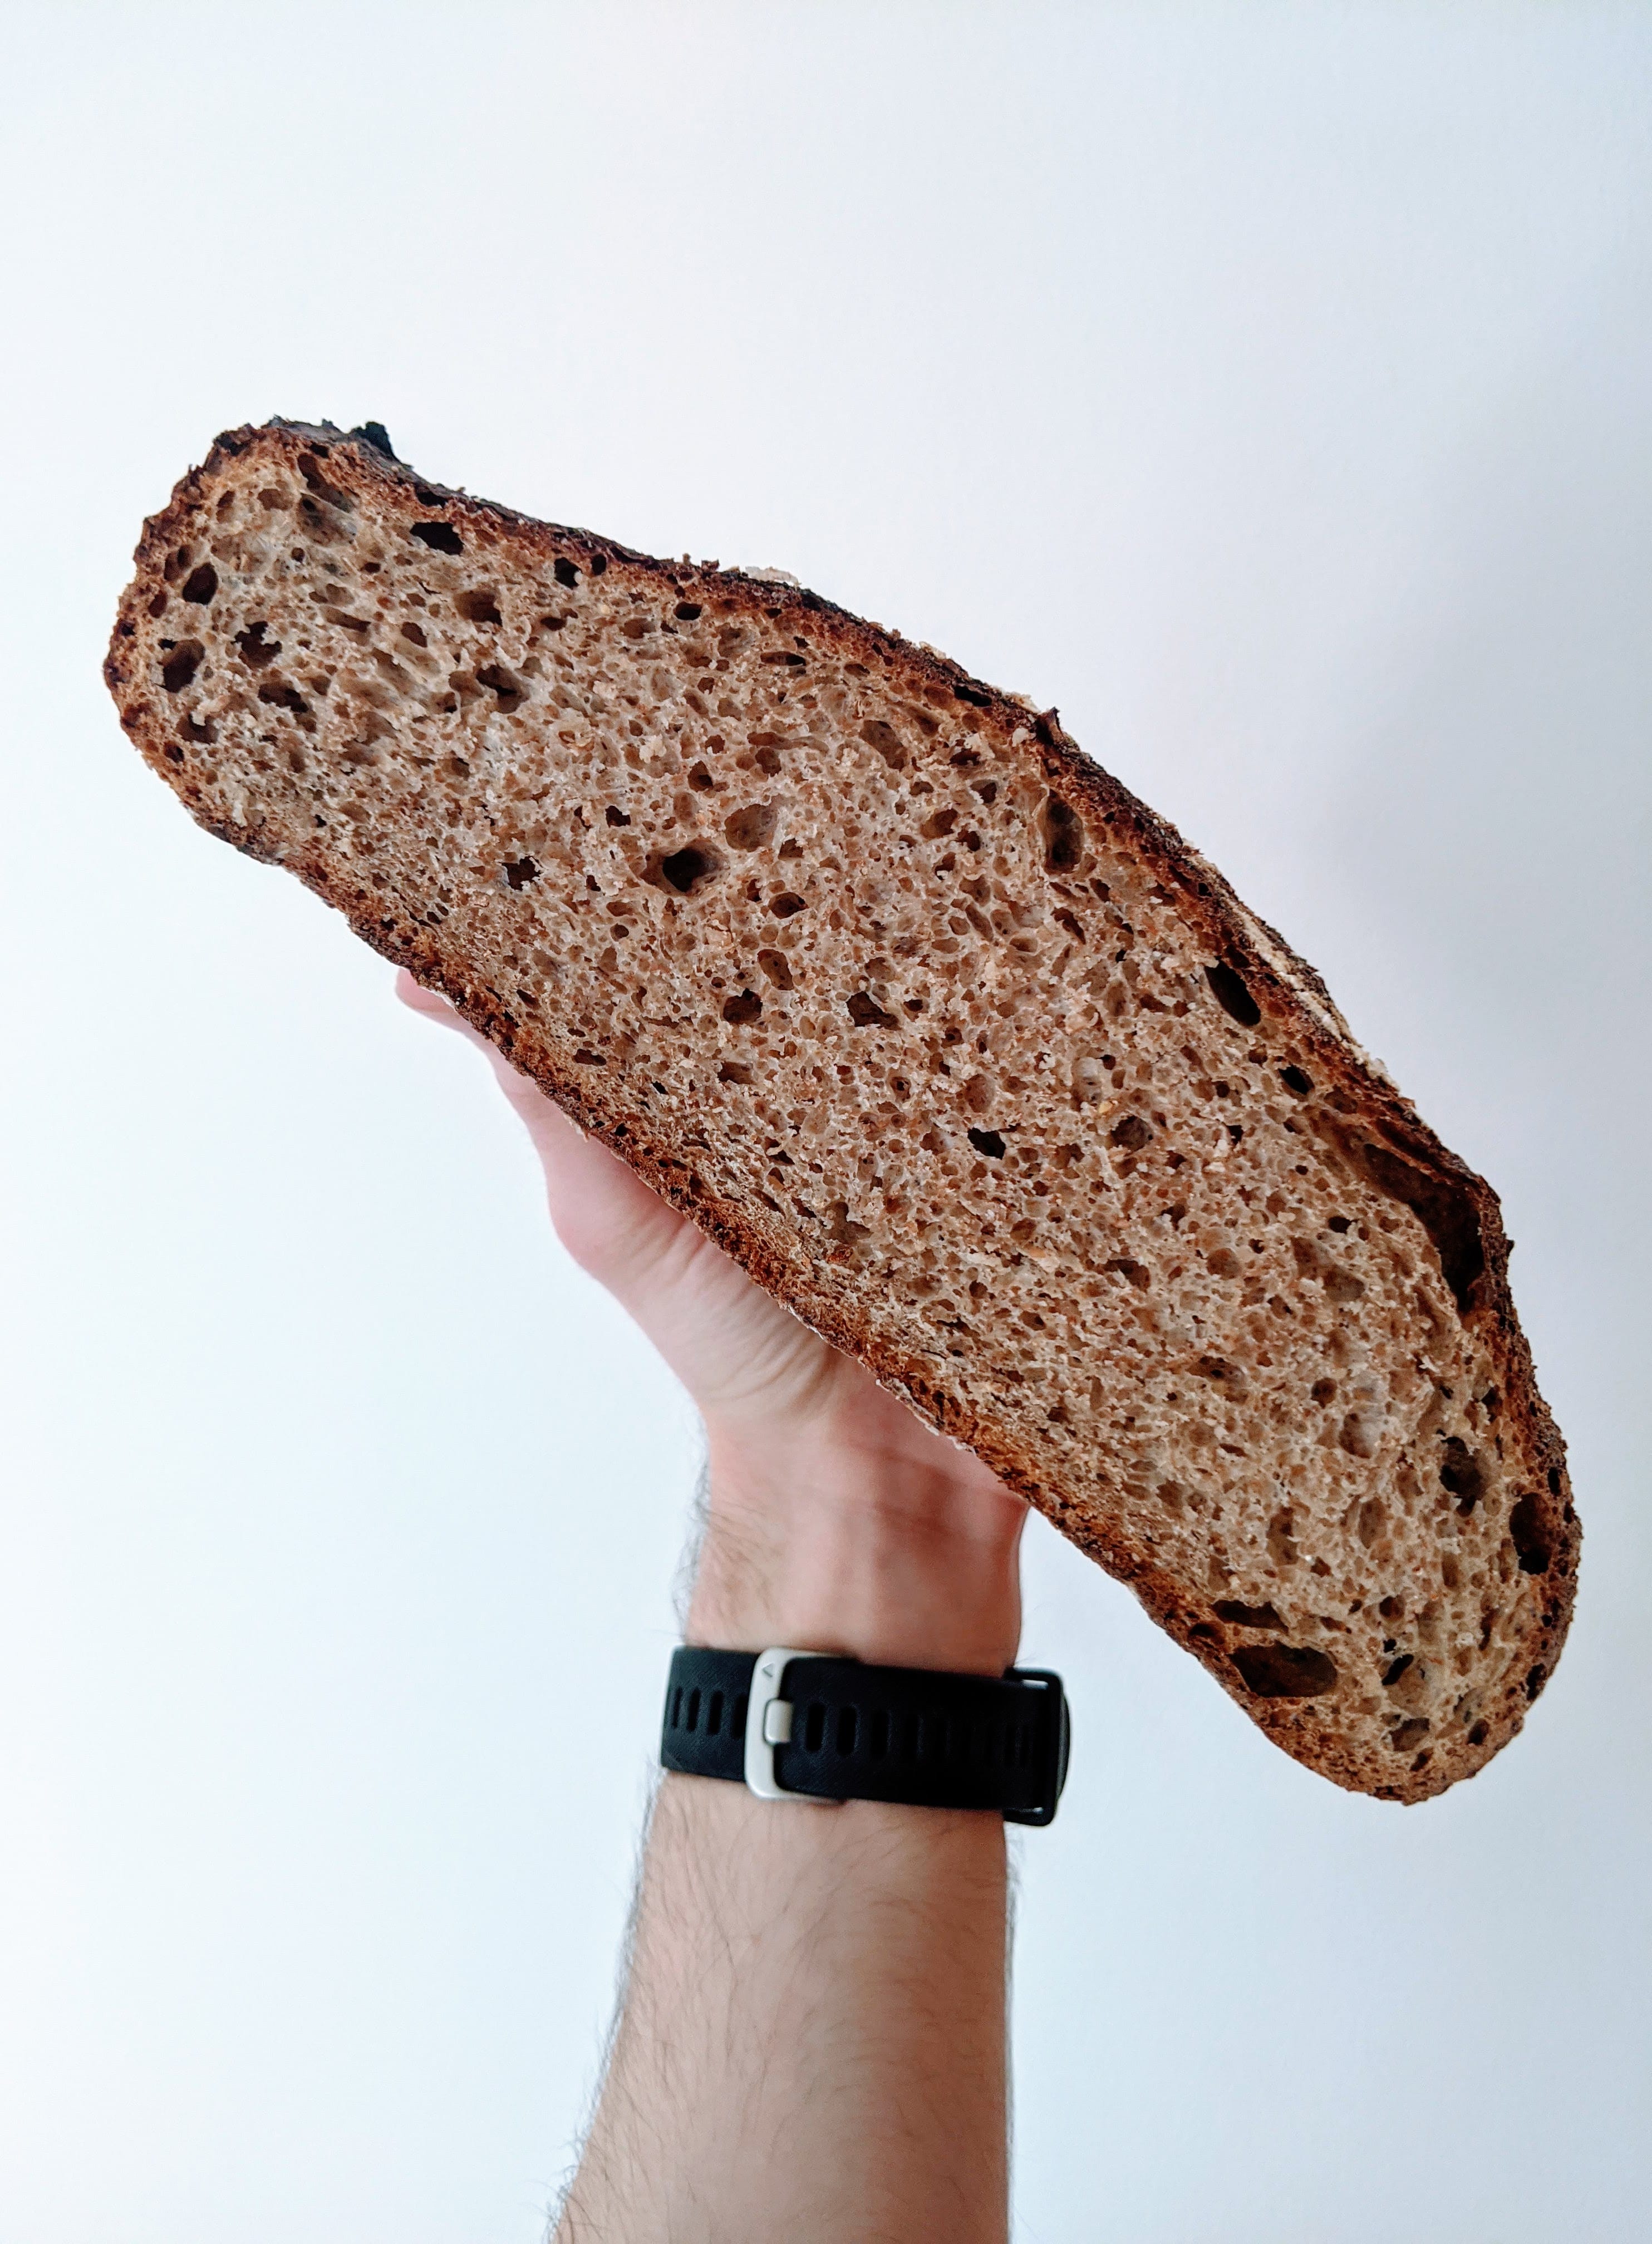 An image of a bread called “Overnight Wholemeal”